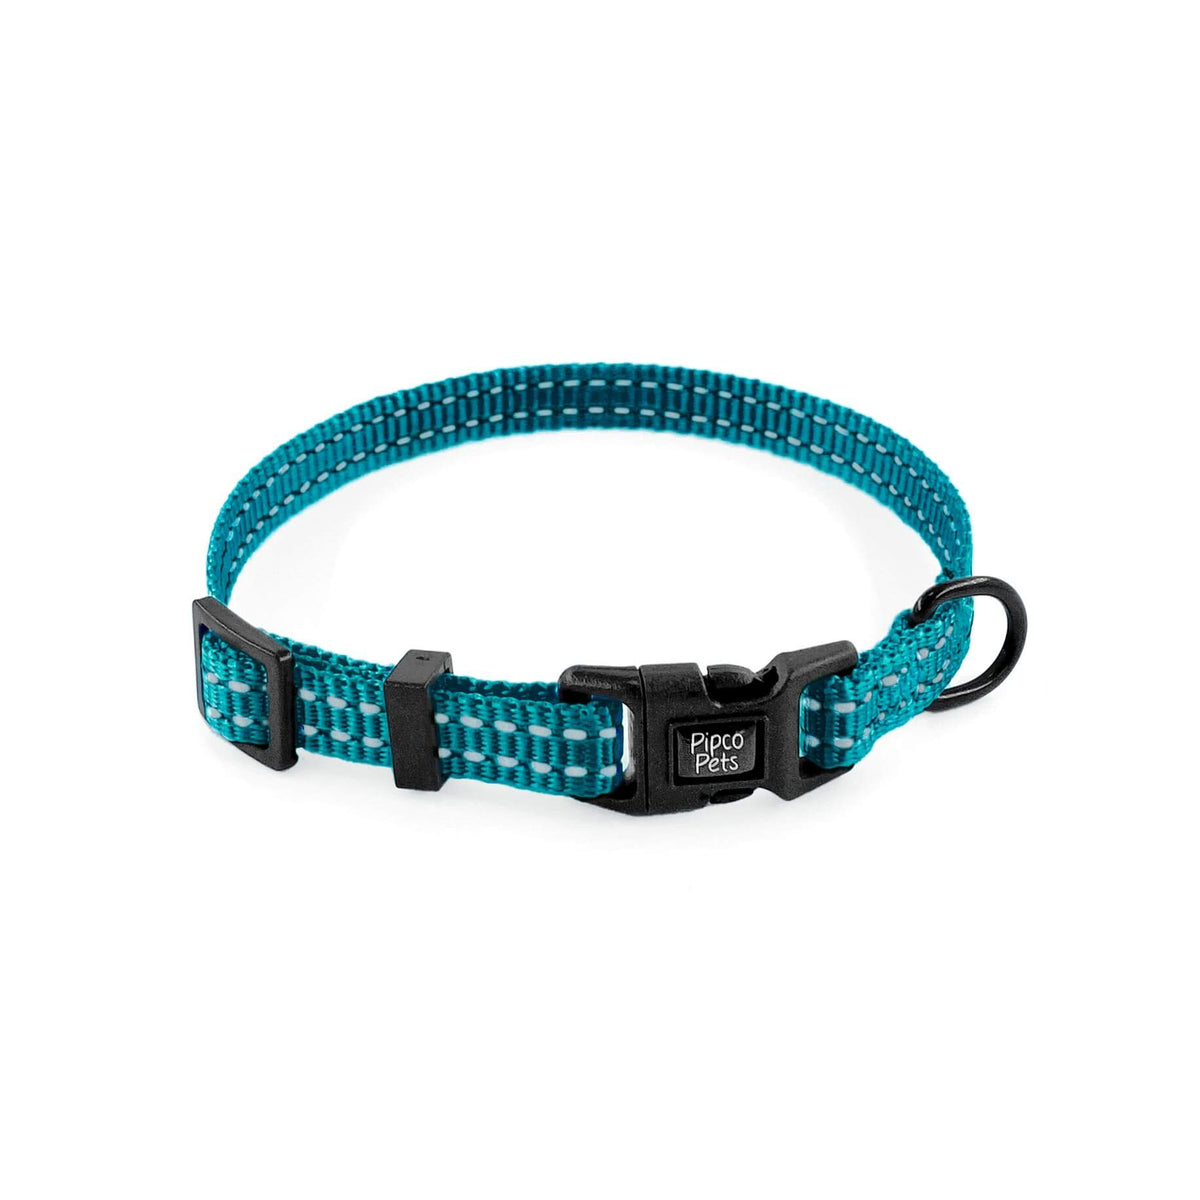 Lightweight Pipco puppy collar in teal with reflective stitching for small dogs